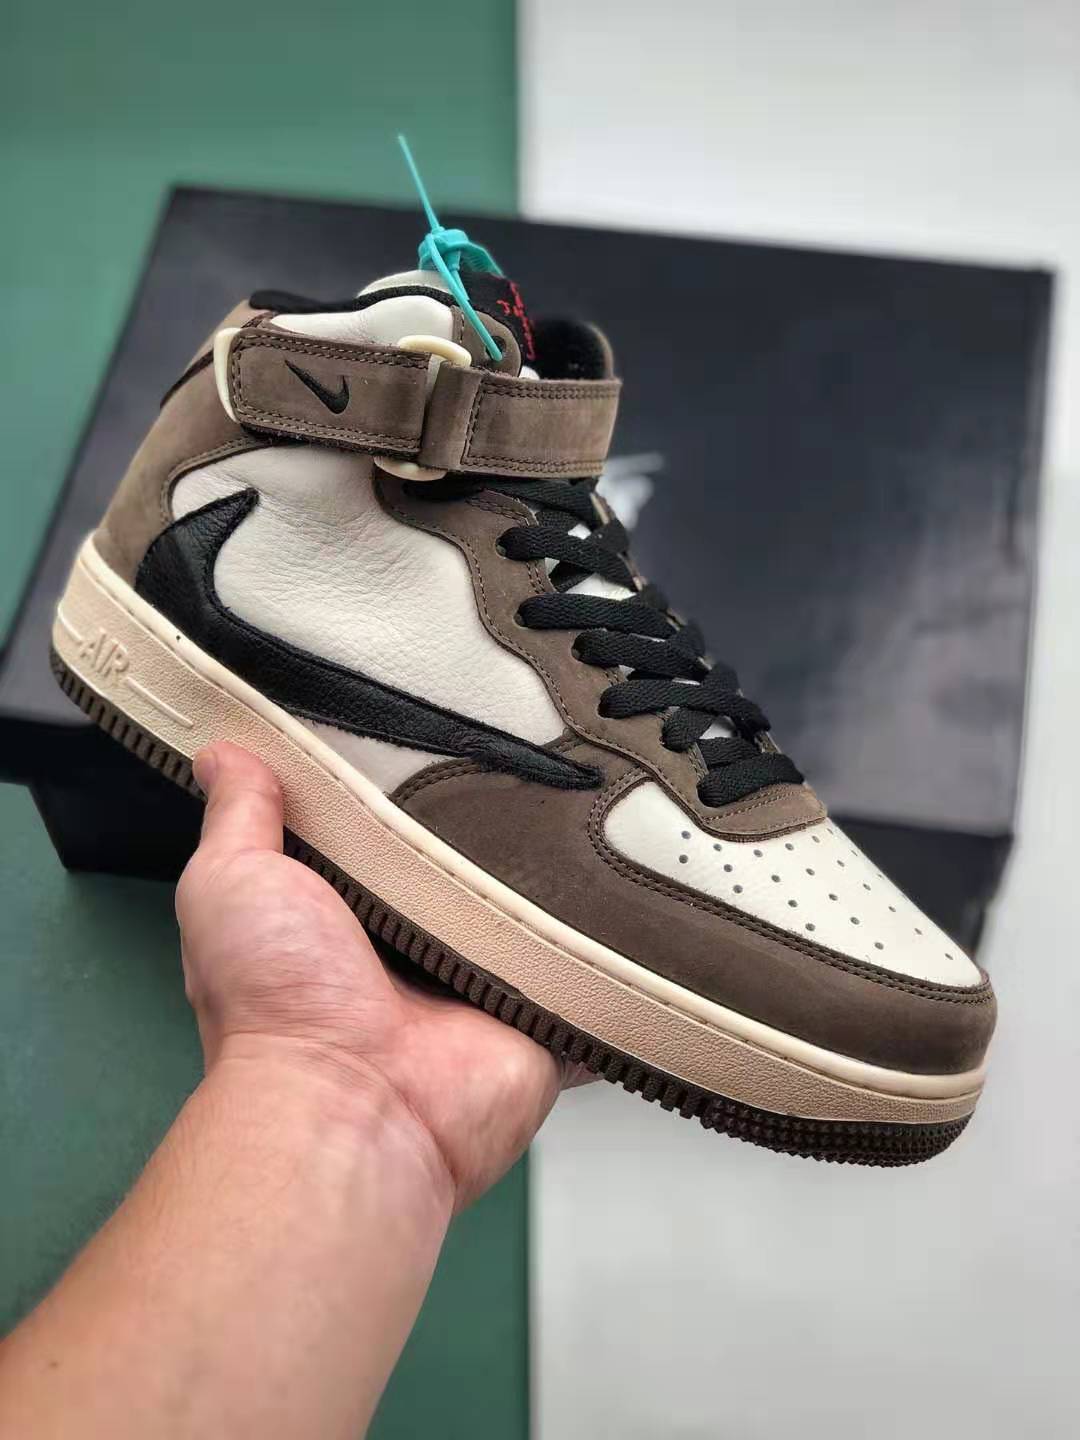 Travis Scott x Nike Air Force 1 Mid 07 Beige Brown White 804609-168 – Limited Edition Sneakers